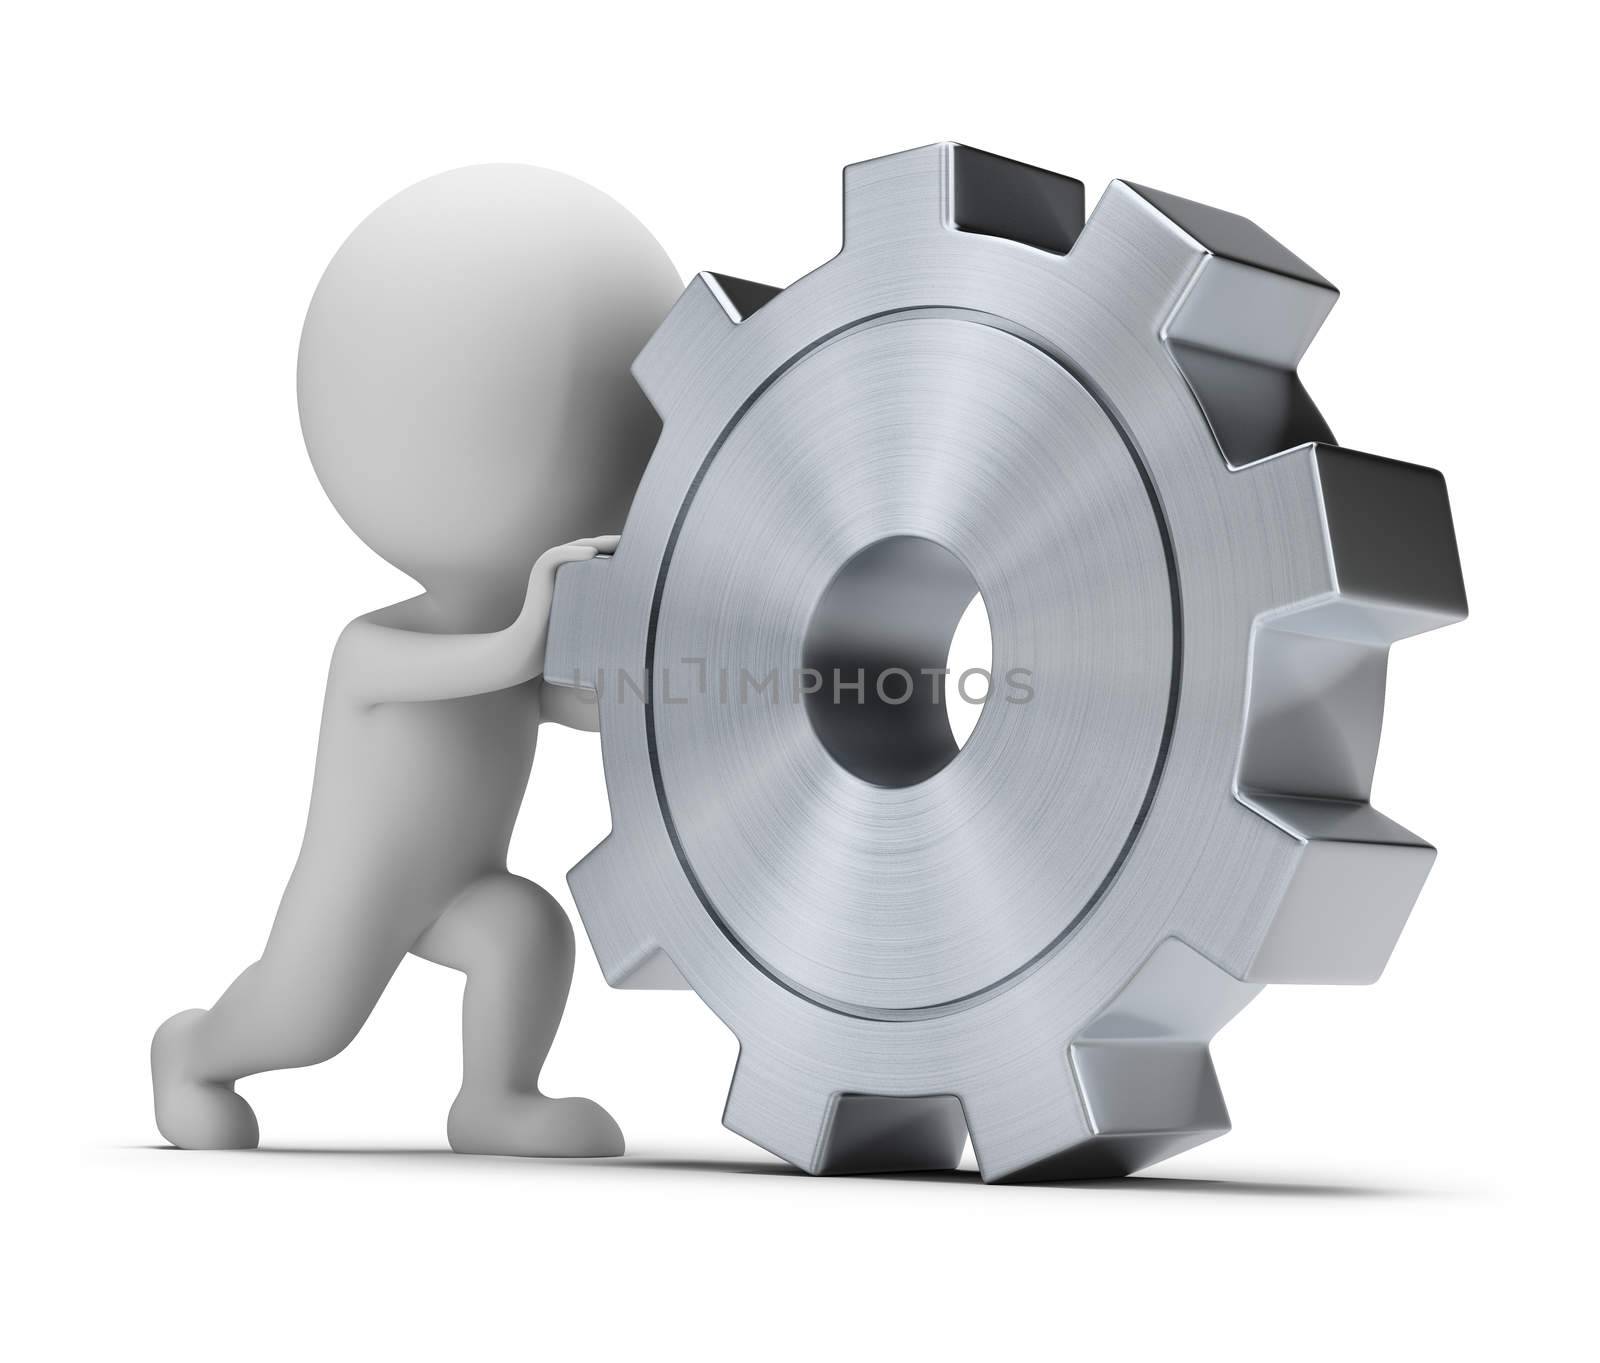 3d small person rolls a large gear. 3d image. Isolated white background.